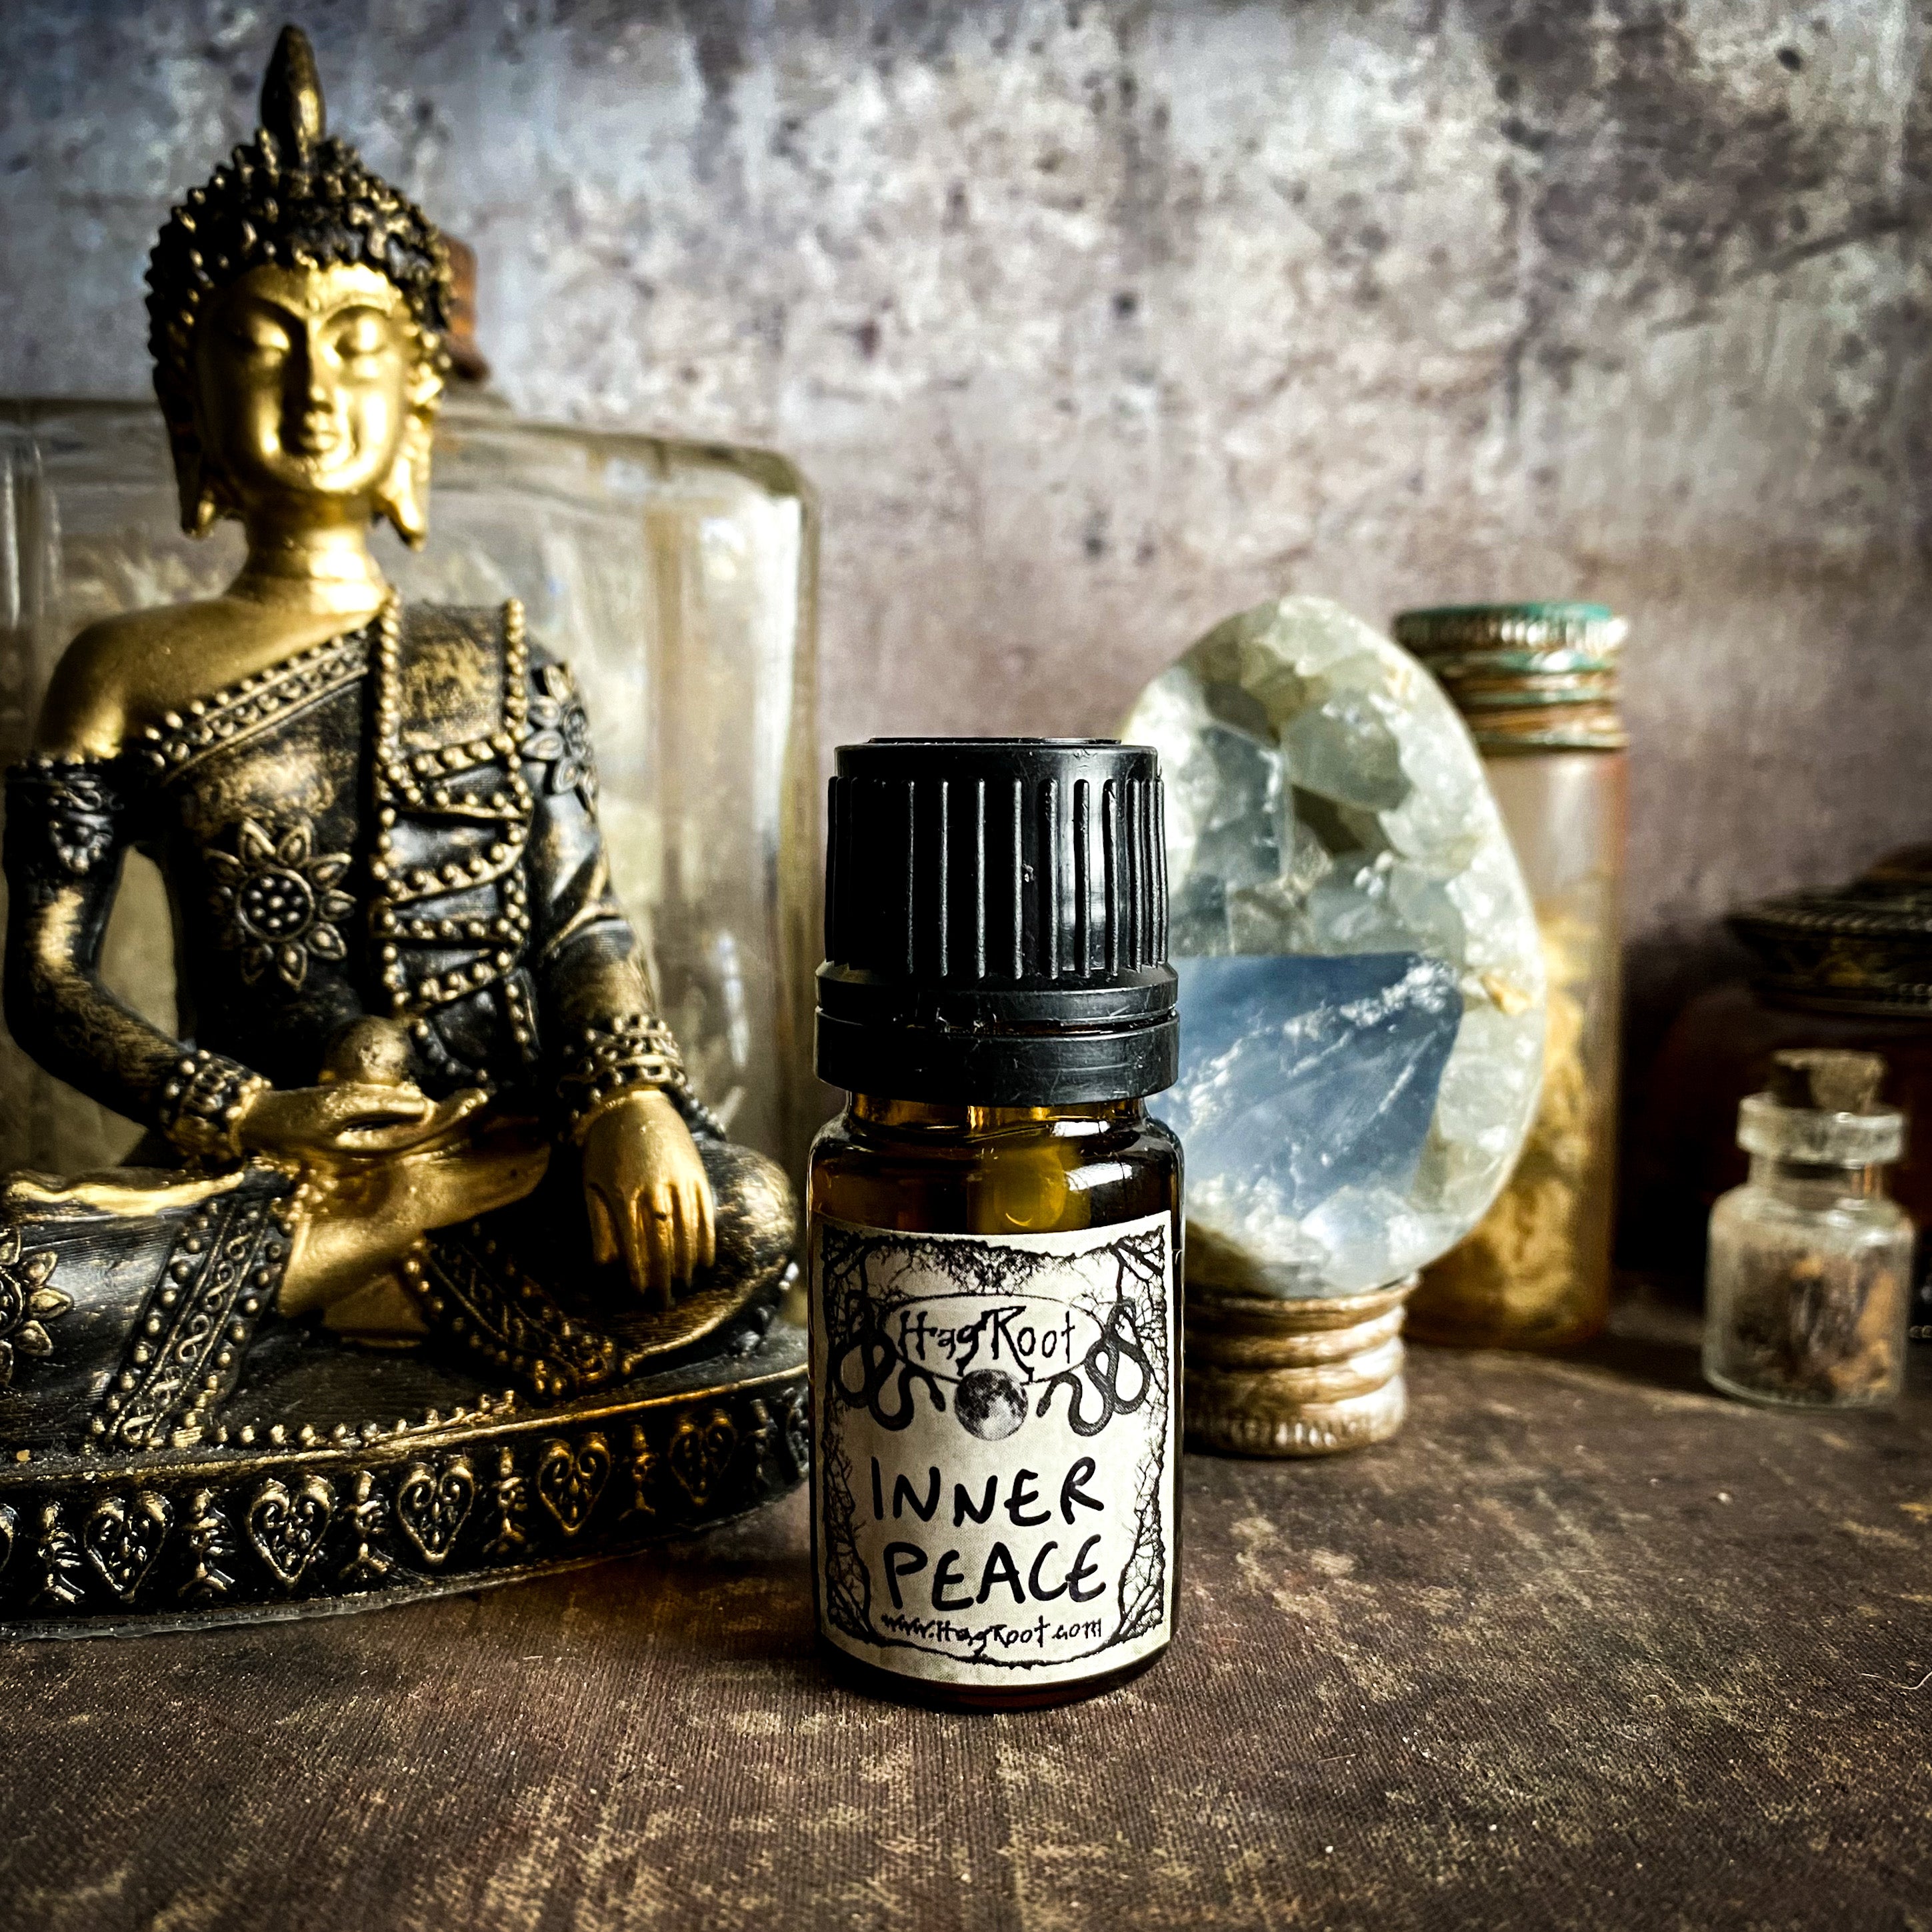 INNER PEACE-(Wildflowers, Ceremonial Resins, Grass, Tonka Bean, Tobacco Leaves)-Perfume, Cologne, Anointing, Ritual Oil